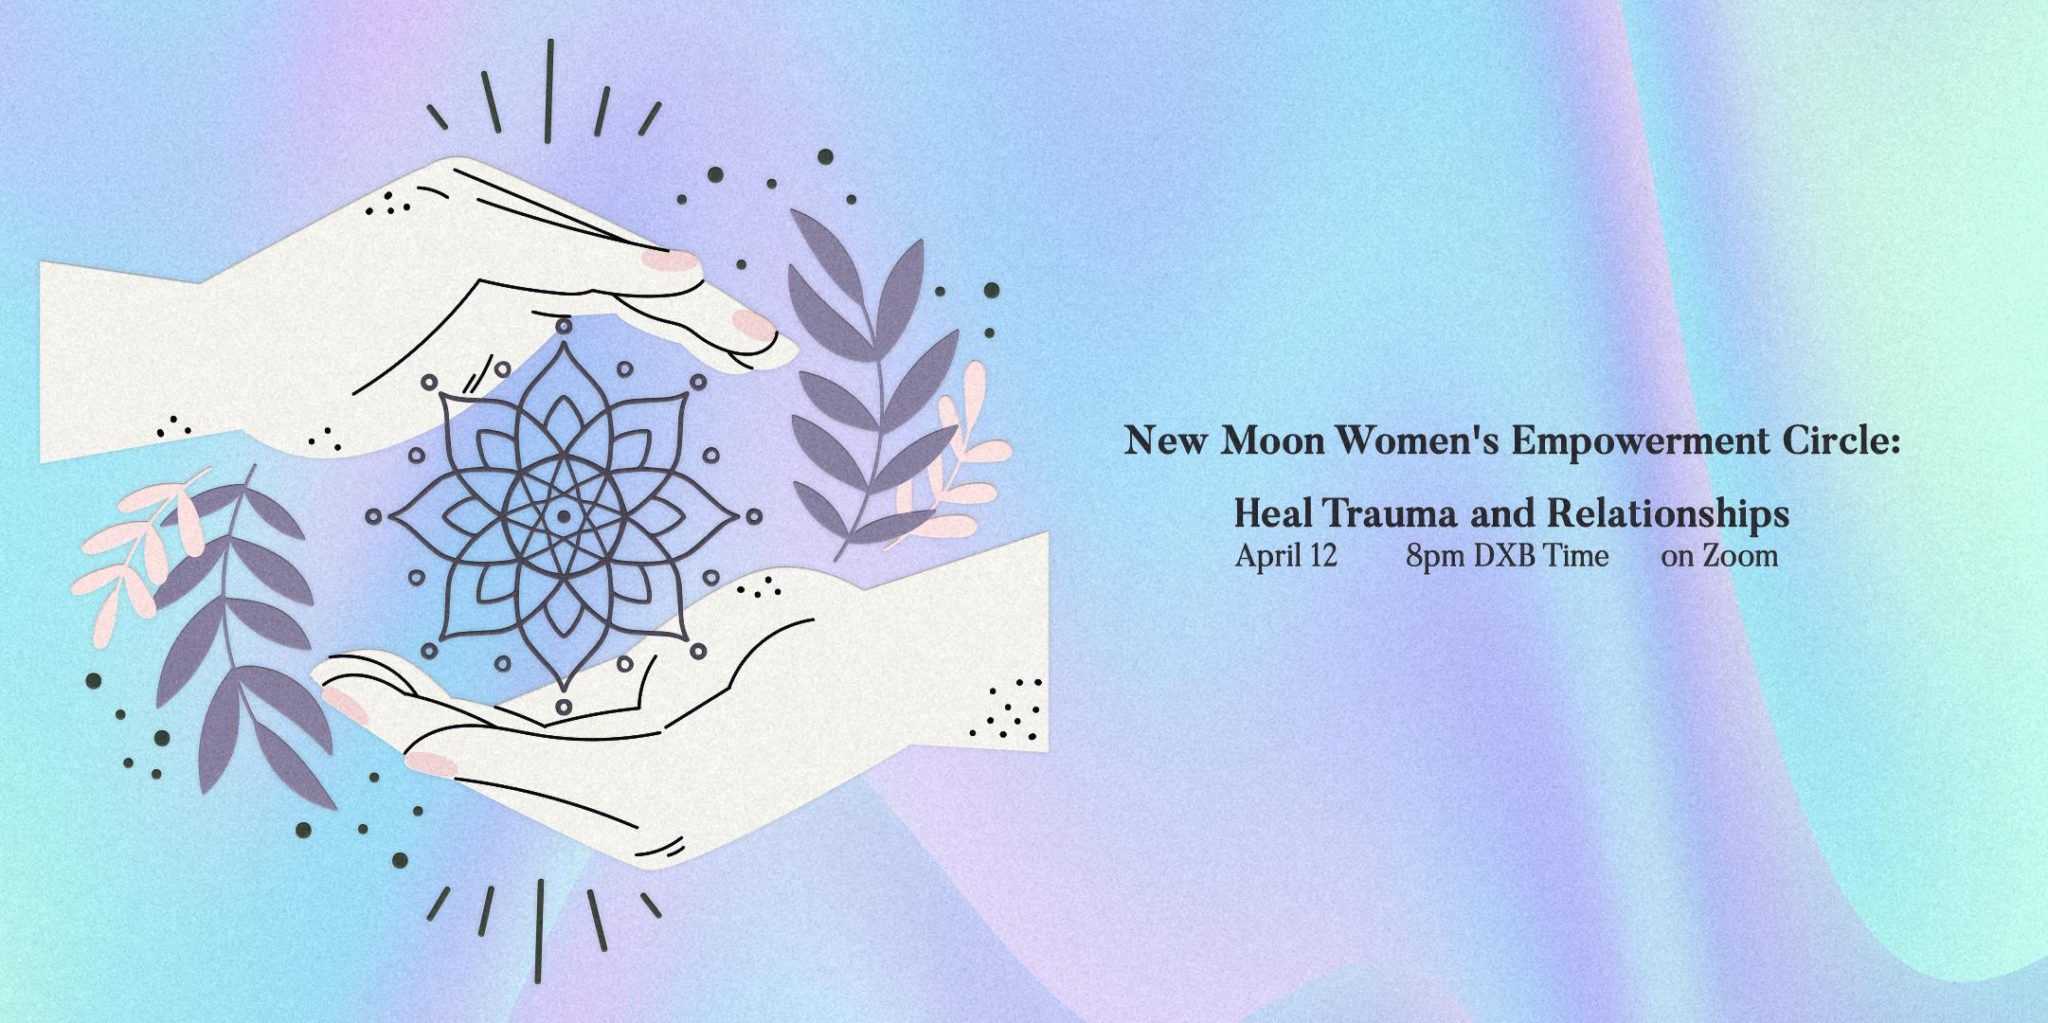 can relationships heal trauma